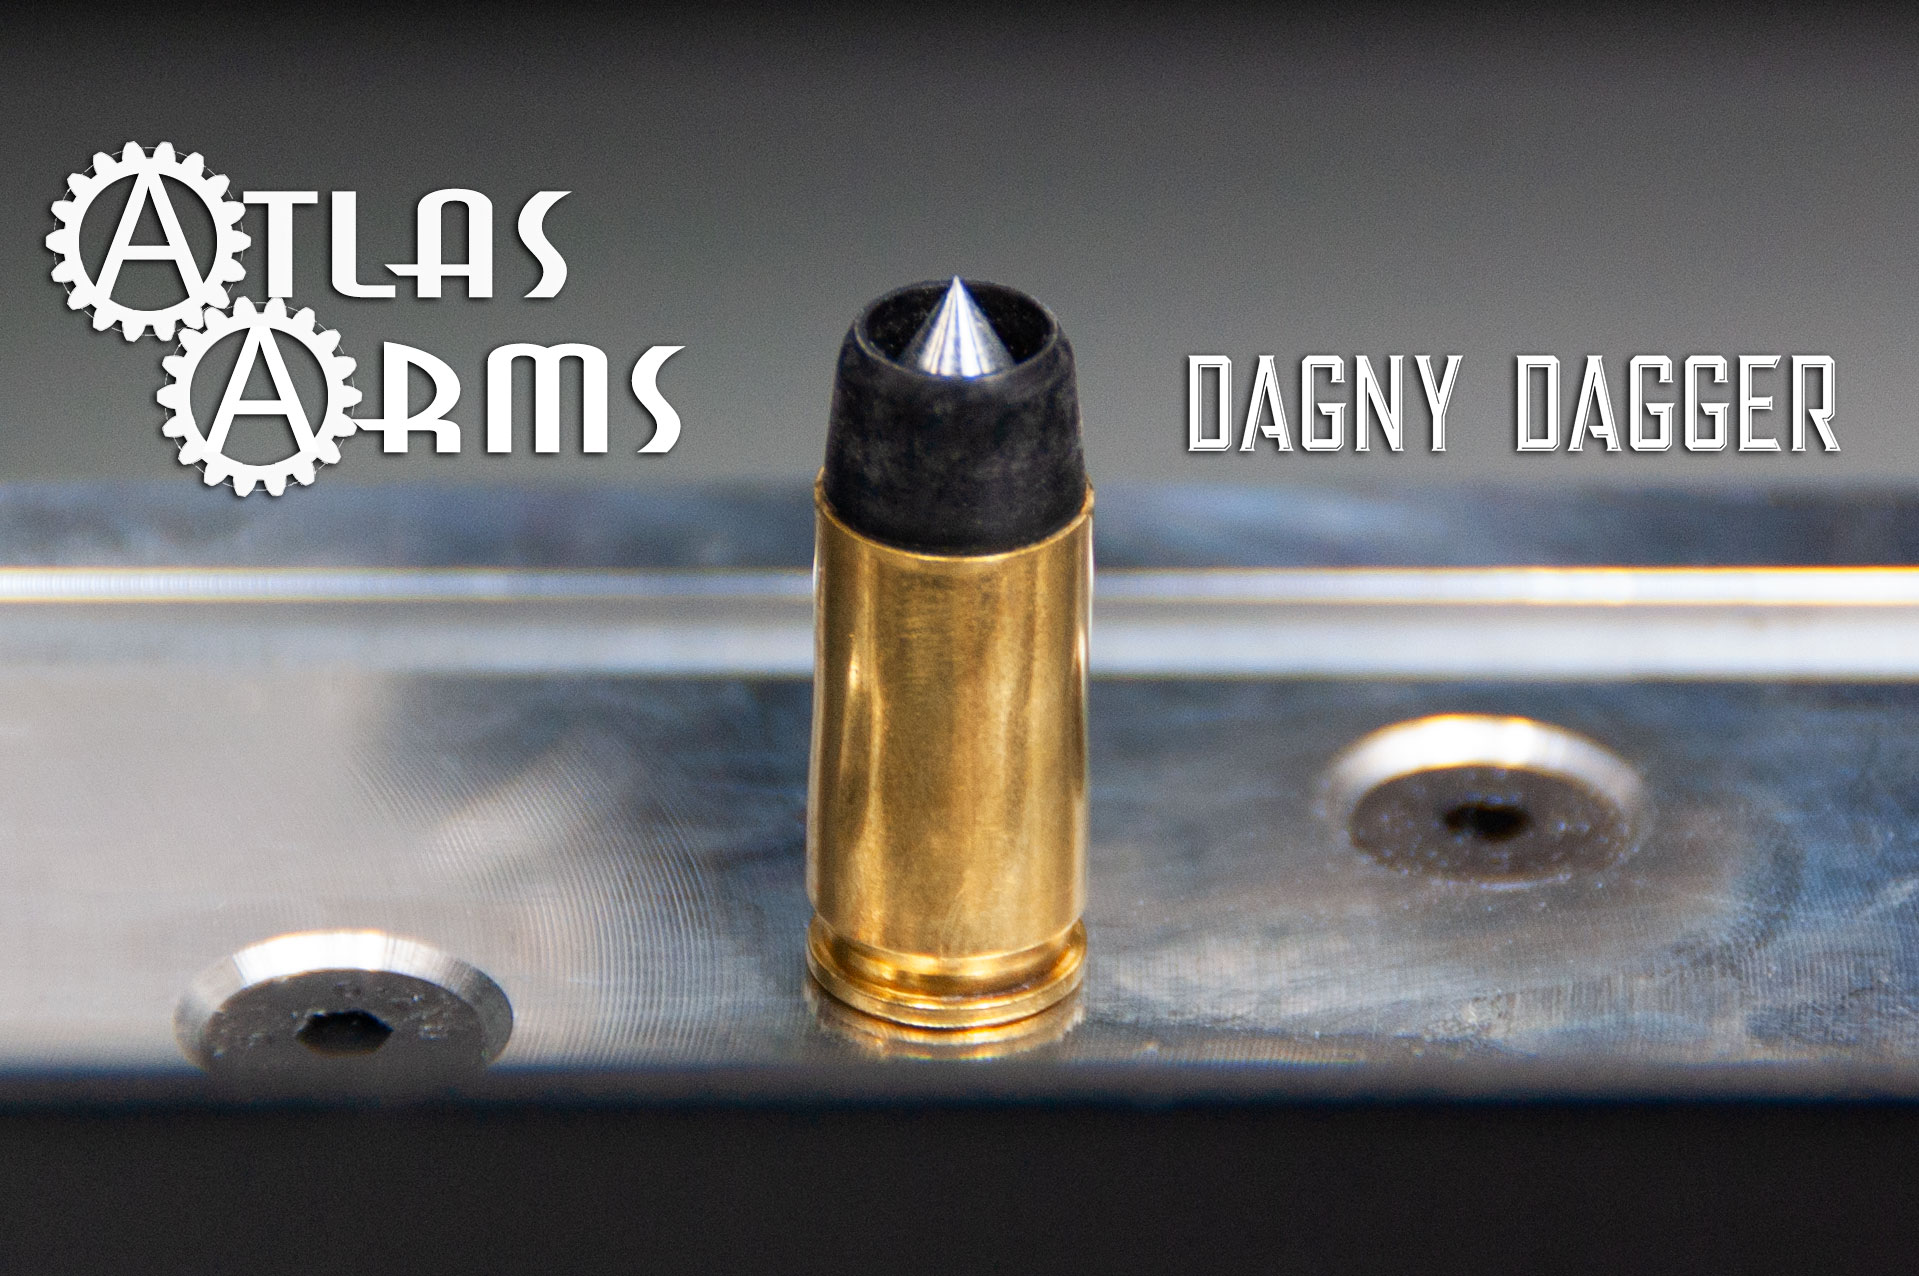 Episode 208: Homemade, Legal Armor Piercing Bullets? Meet the Man Who Made it Happen